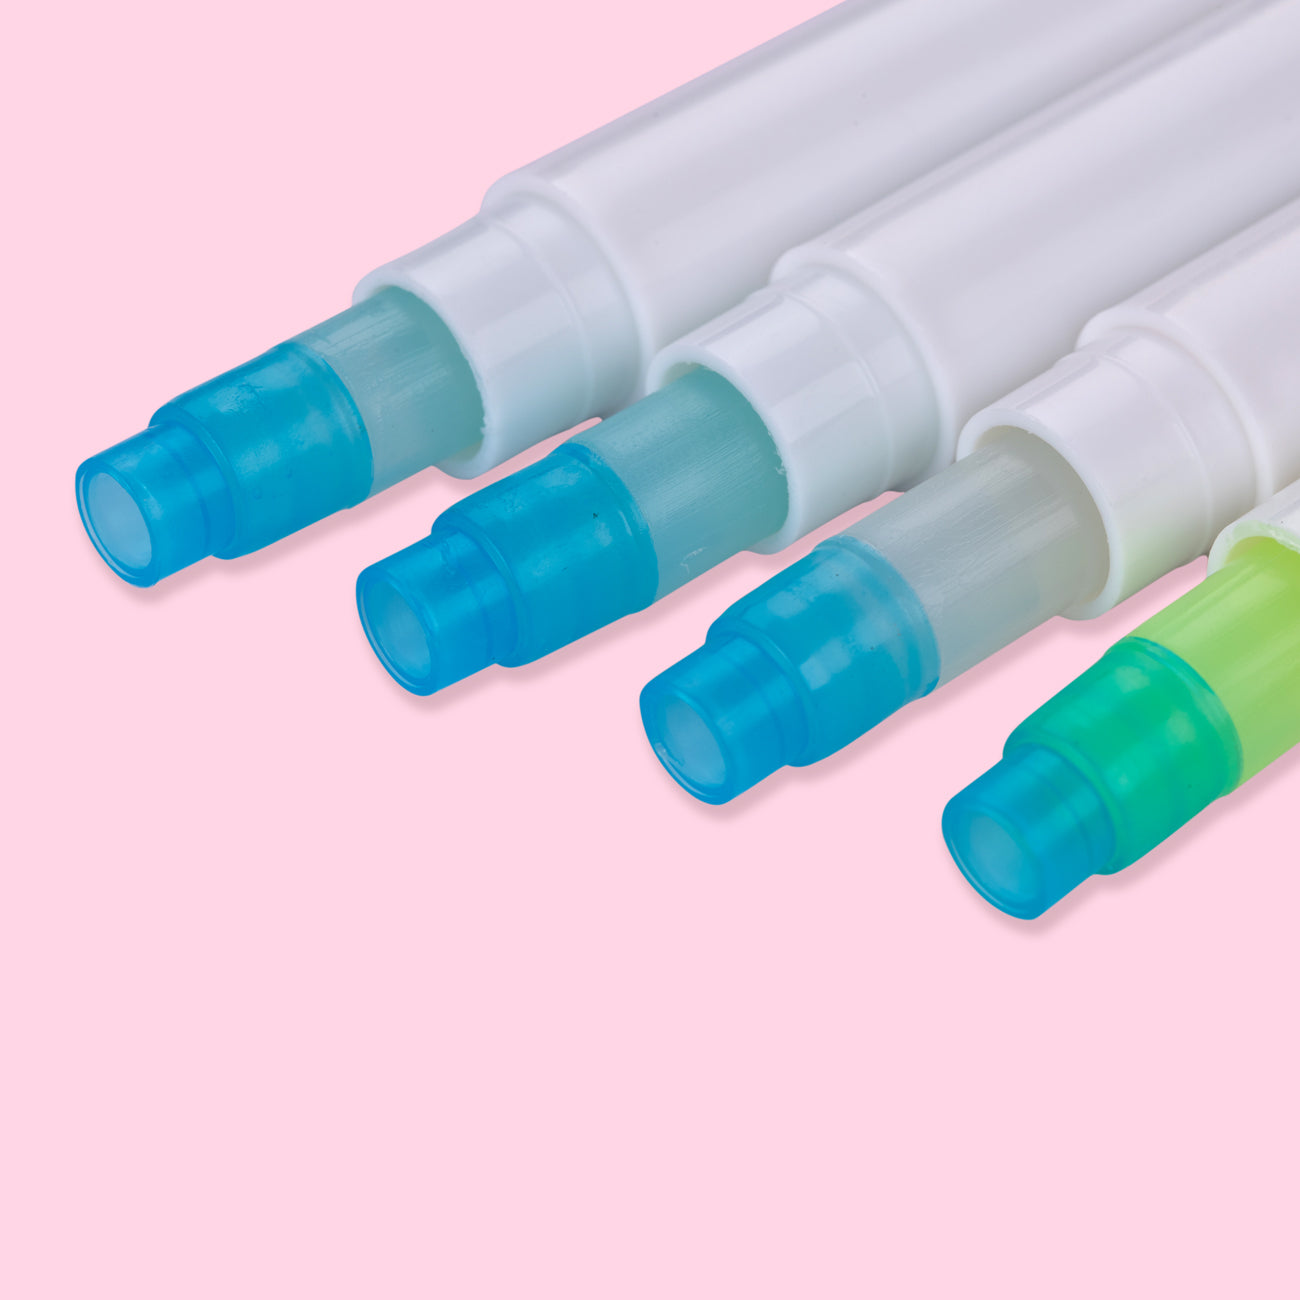 Refillable Glue Stick - 4- Pack Refill